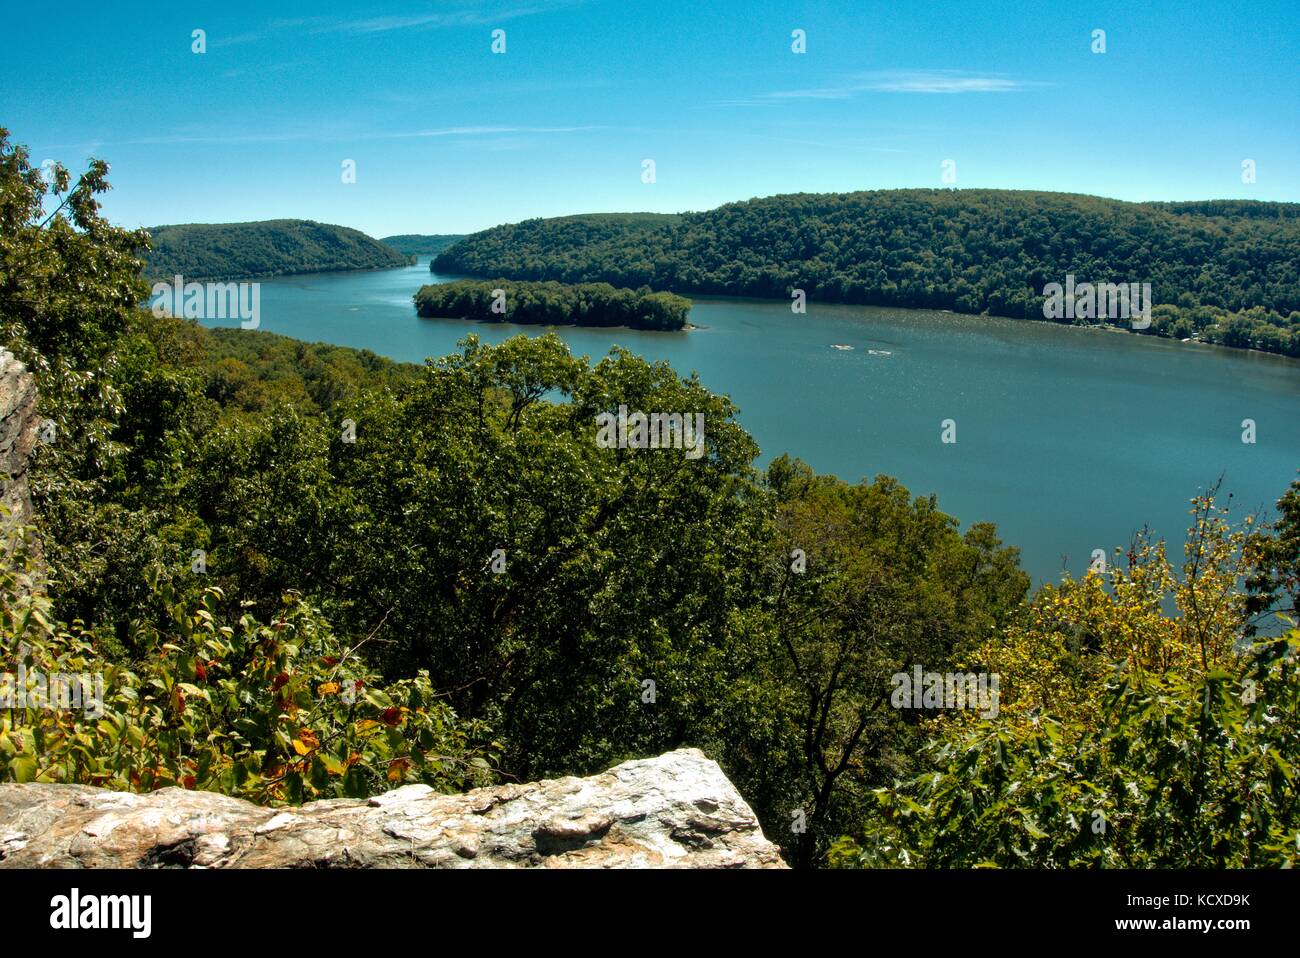 A view from one of the bluffs overlooking the Susquehanna River from Pennsylvania's Conestoga Trail Stock Photo